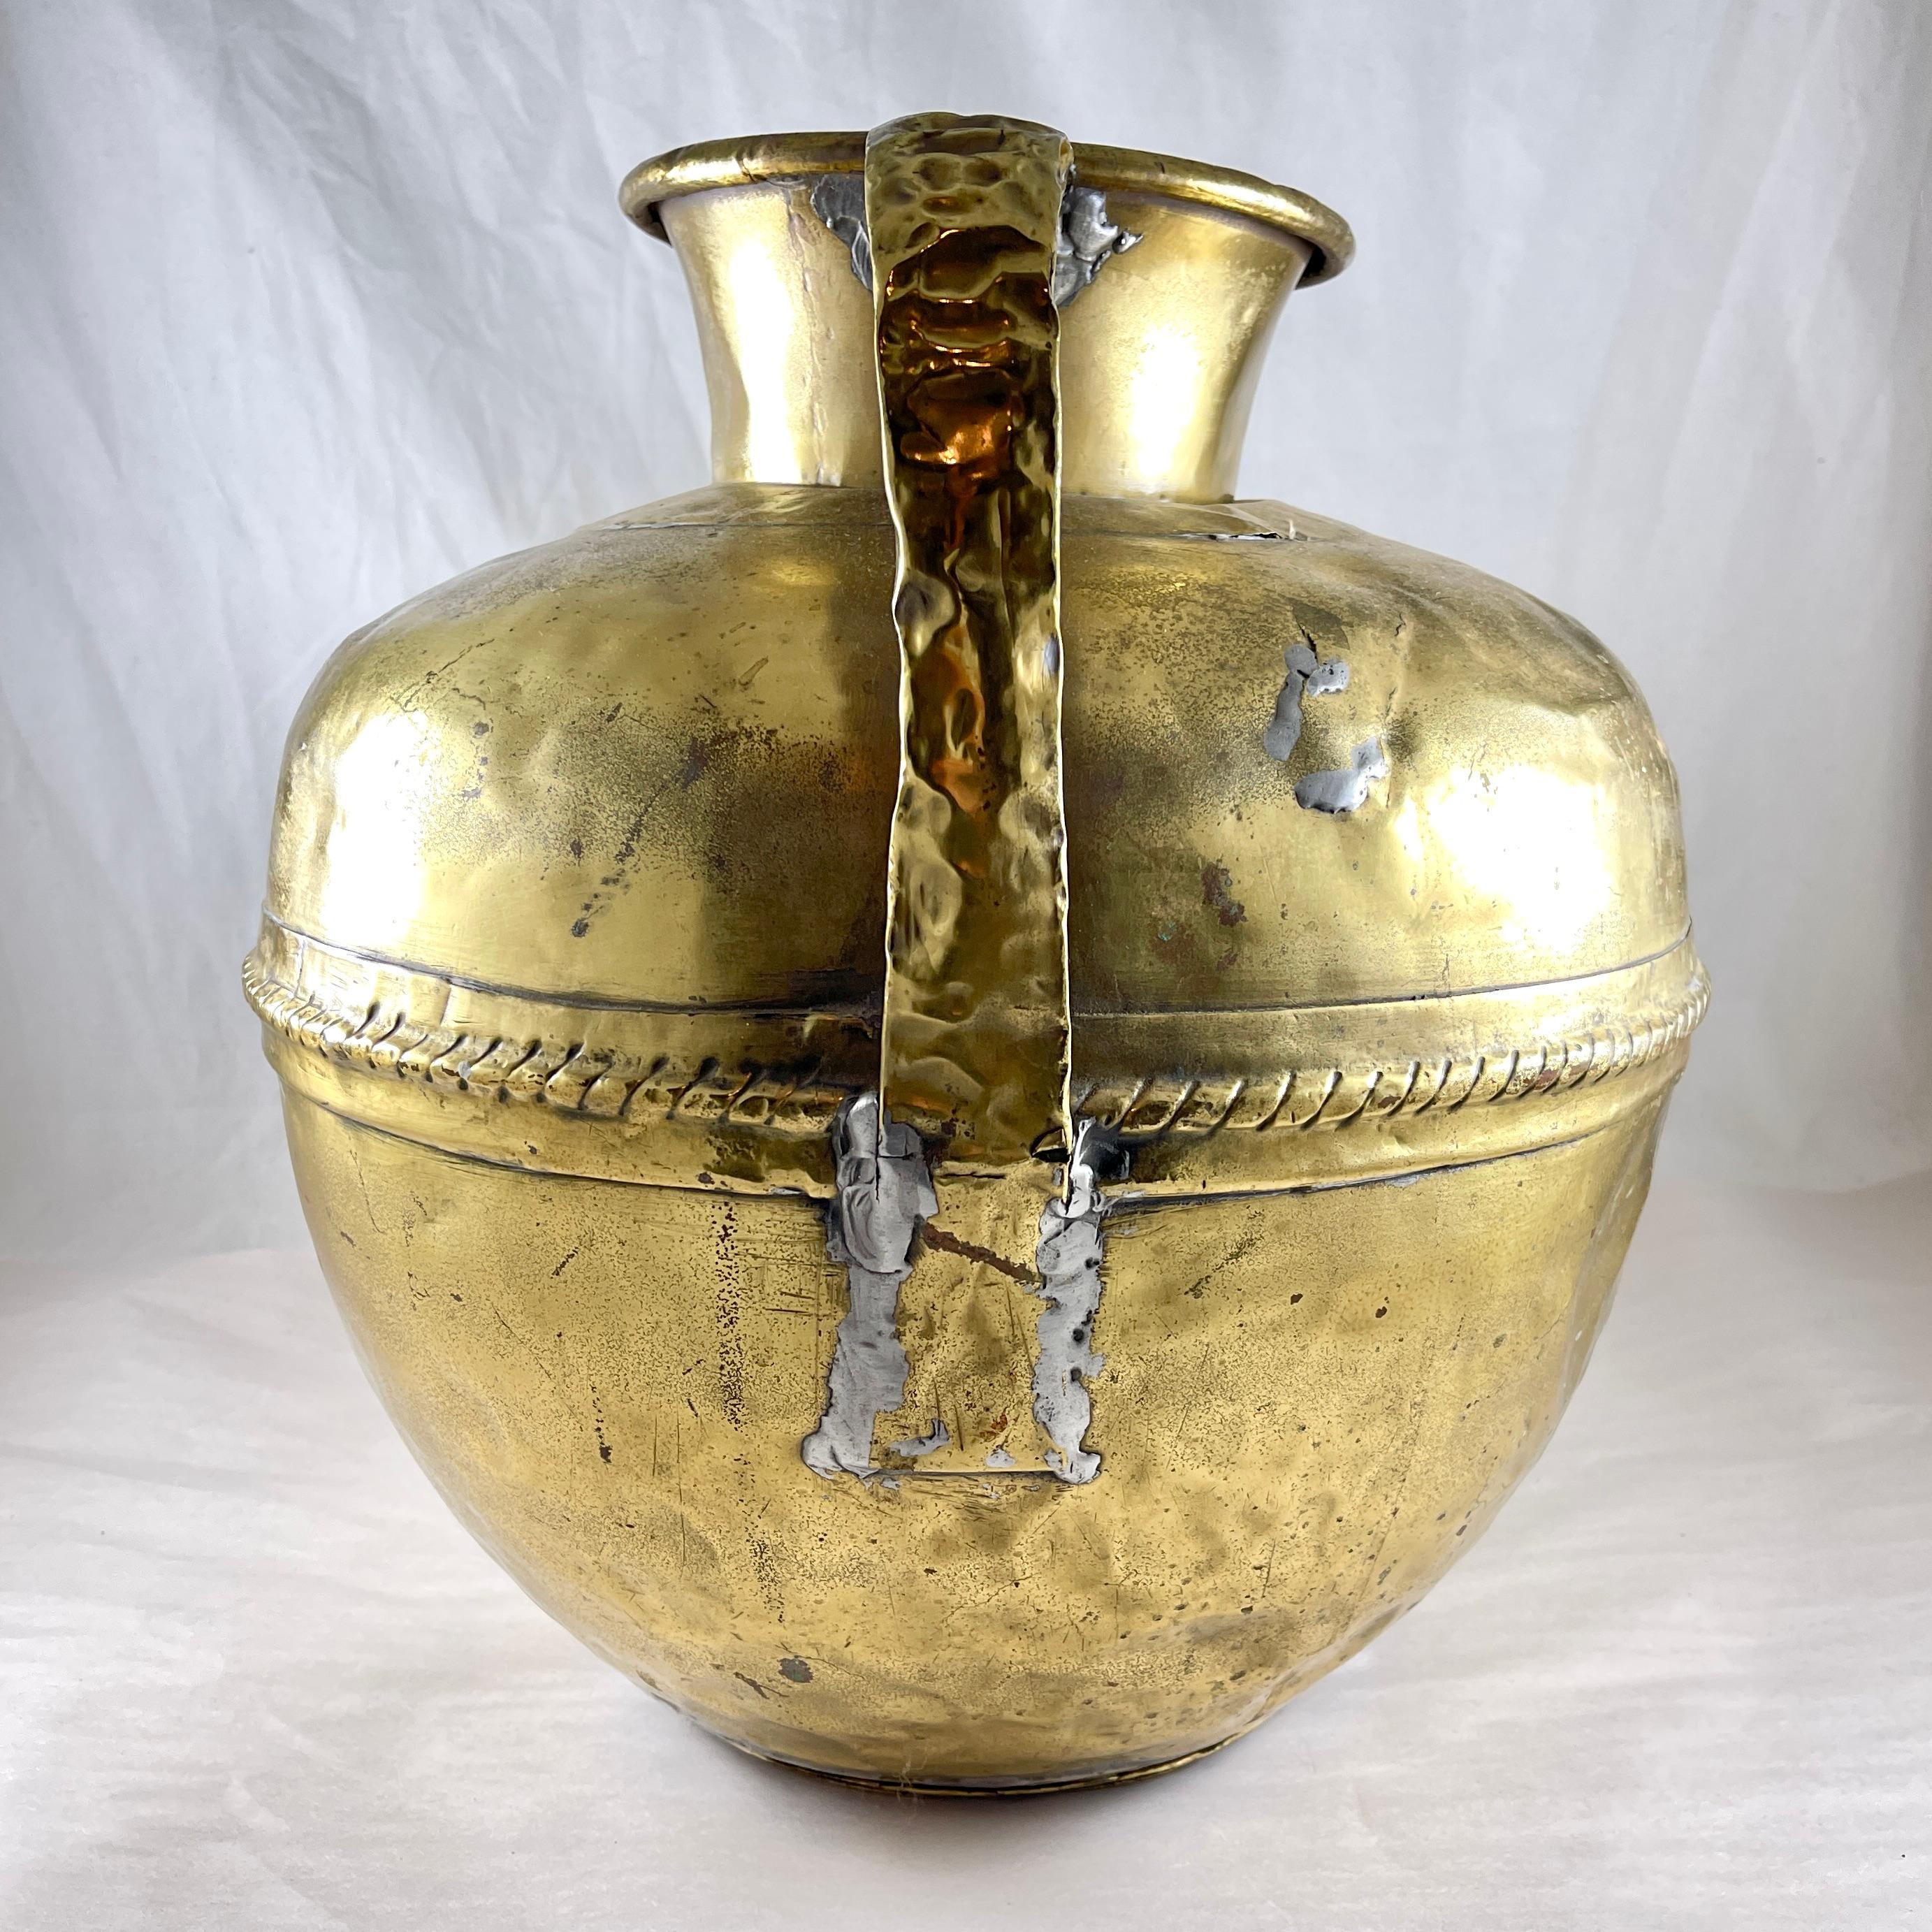 French Normandy Large Rustic Brass Milk Jug with Lid – circa 1850 For Sale 2